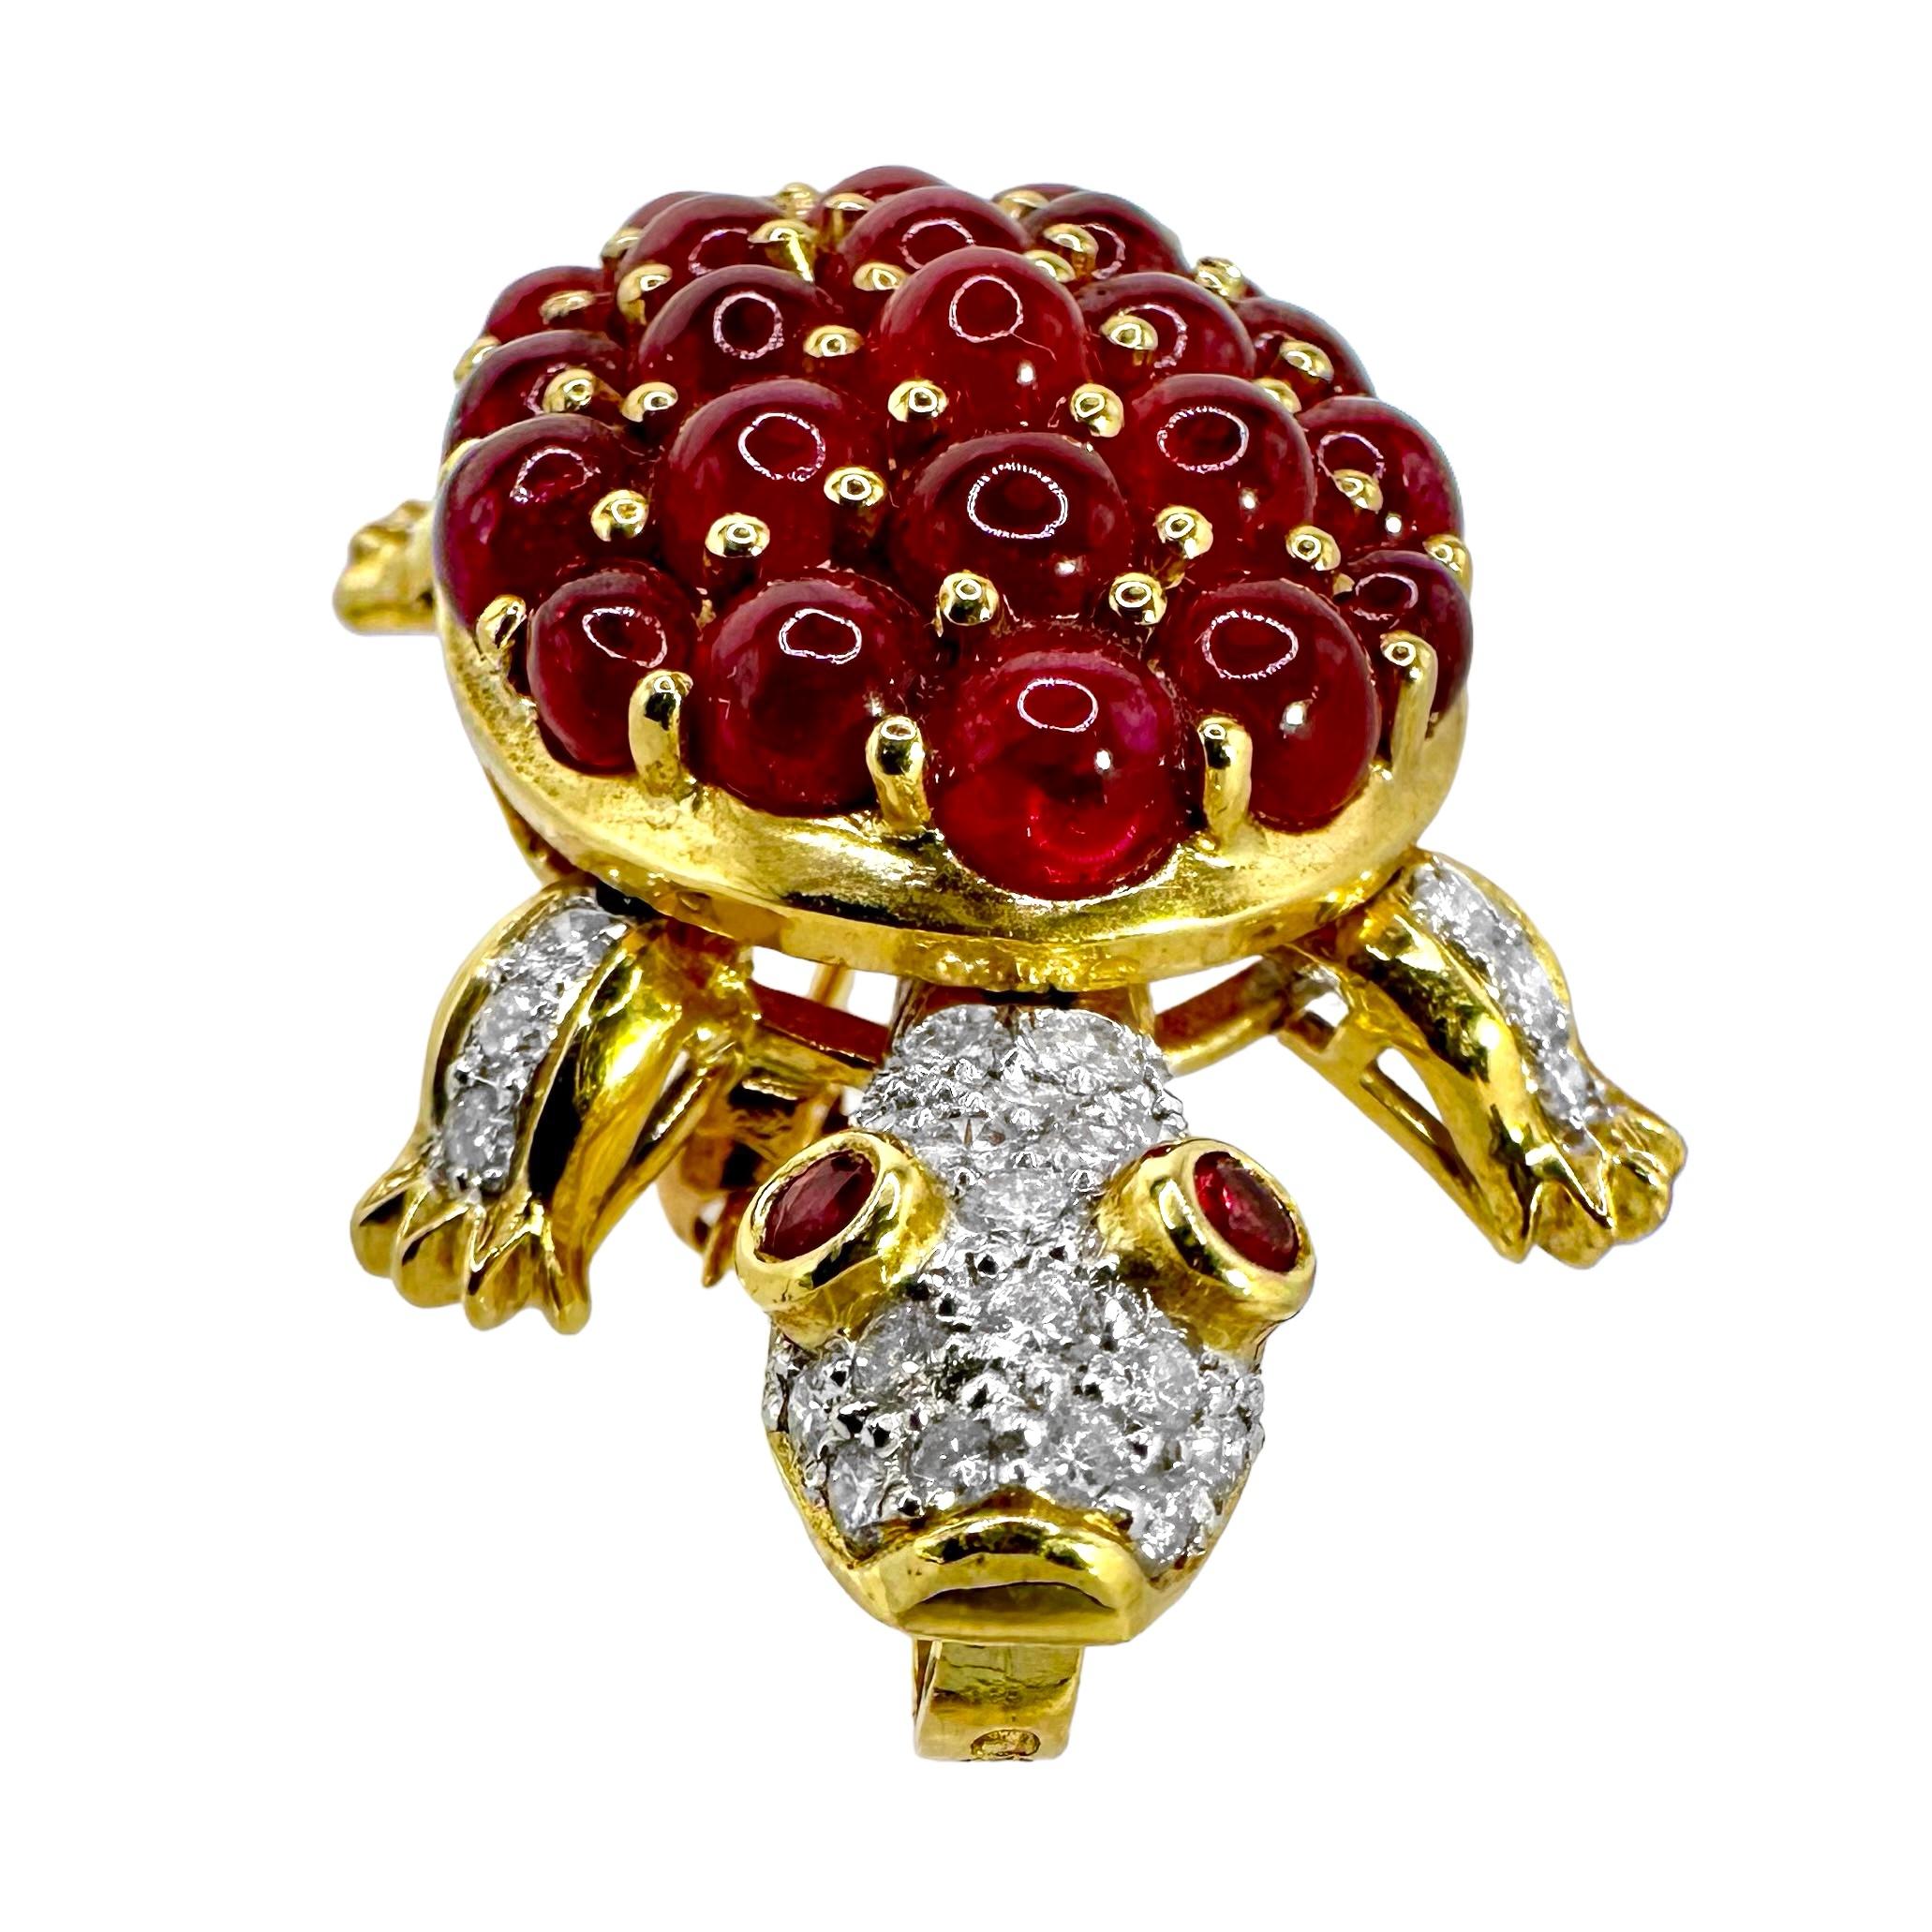 Adorable Turtle Brooch/Pendant with Motion in 18K Gold, Diamonds, and Rubies For Sale 1